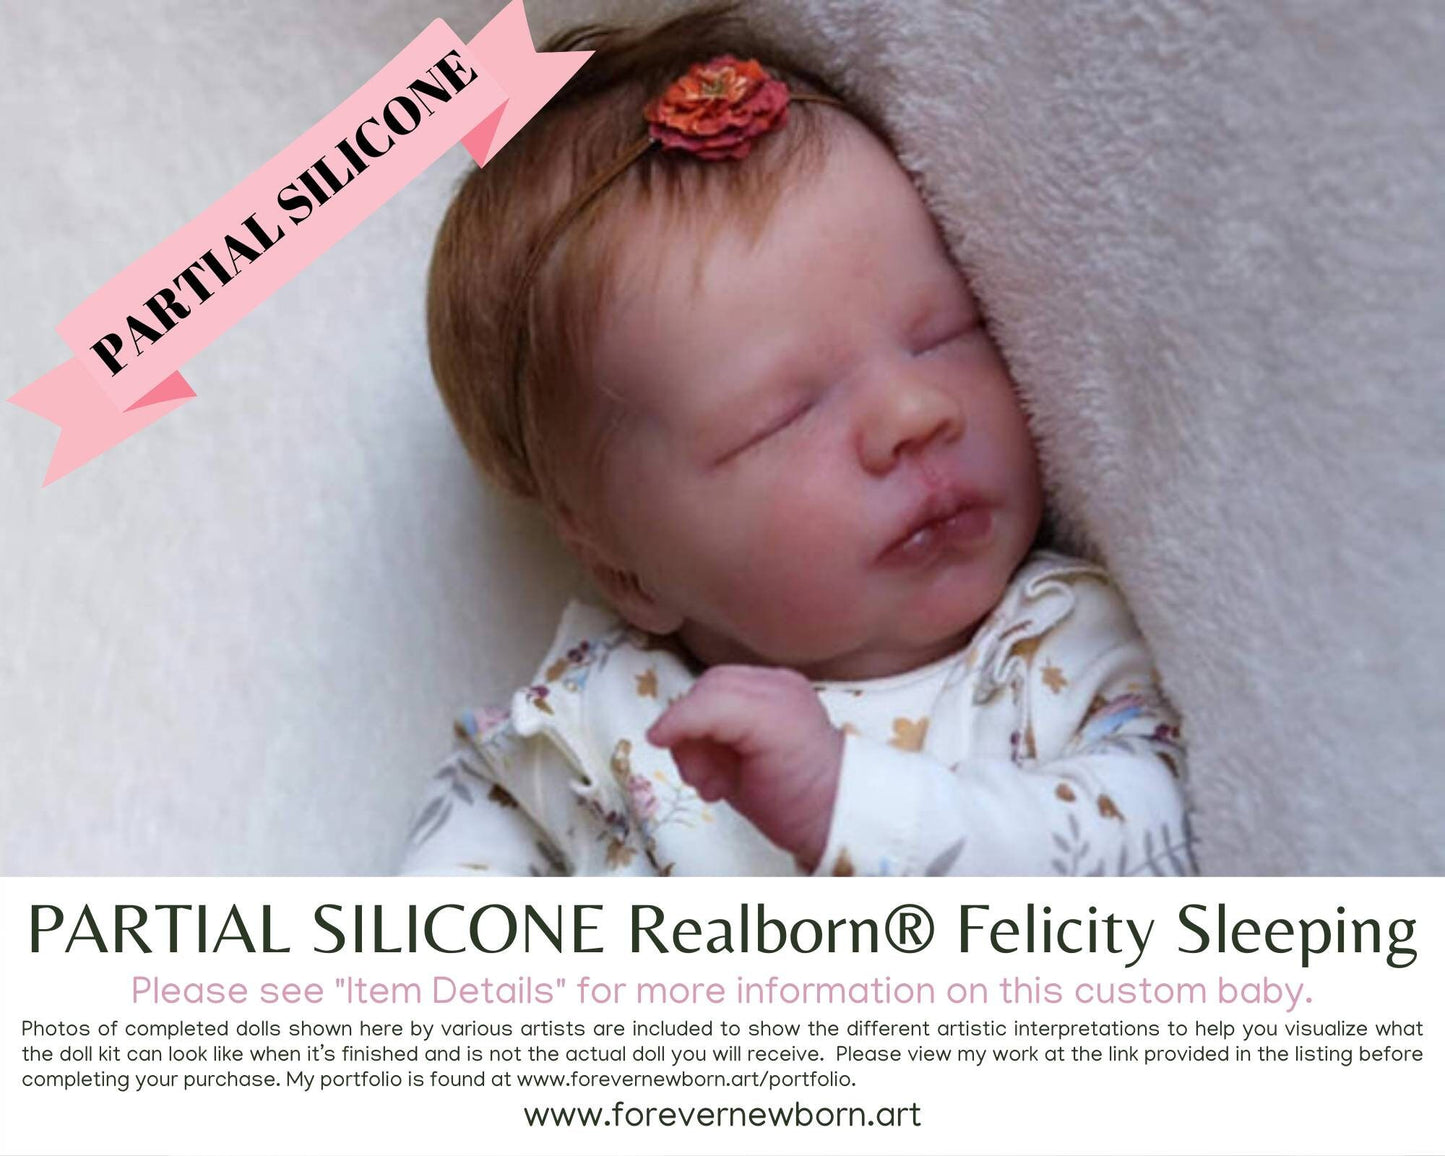 SiLiCoNe BaBy Realborn® Felicity Sleeping (18.75"+ Full Limbs) with cloth body. Extended Processing Time May Be Required. ASK FIRST!